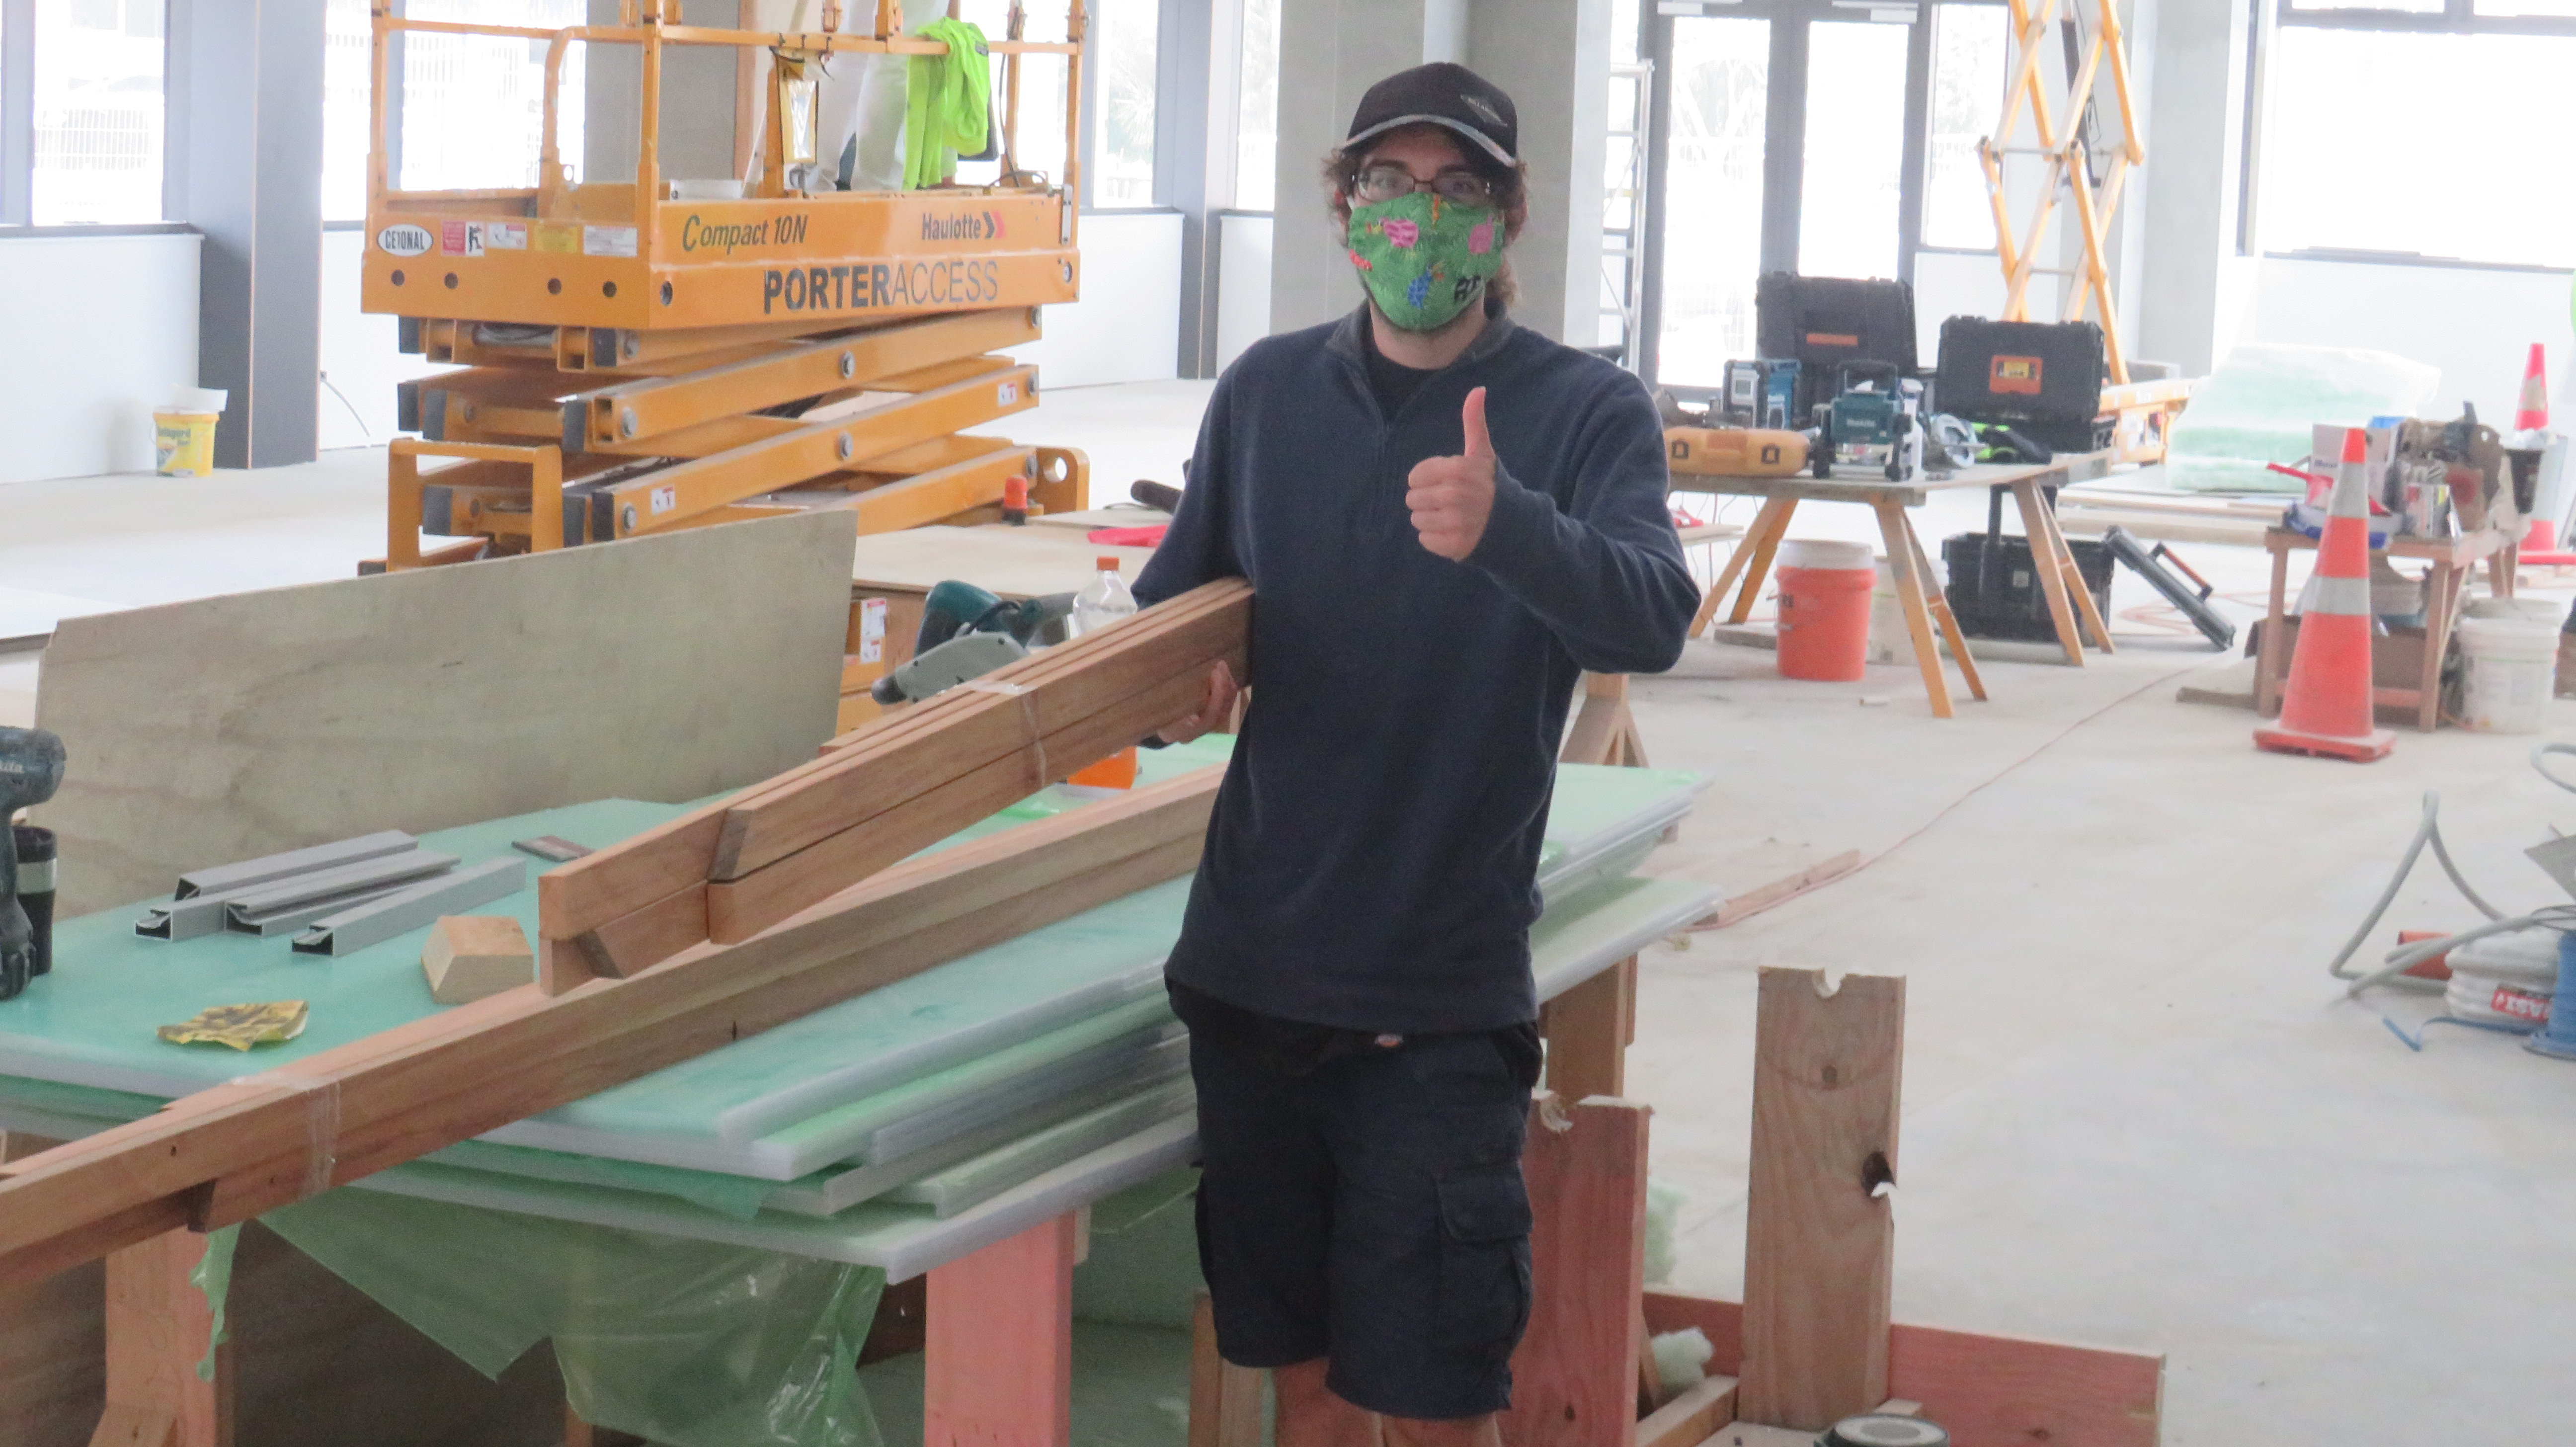 Image of Rueben Aikman carrying framing timber being used to frame the art that will go on the pou pou in the interior of Te Tāhuhu o Te Rangi.